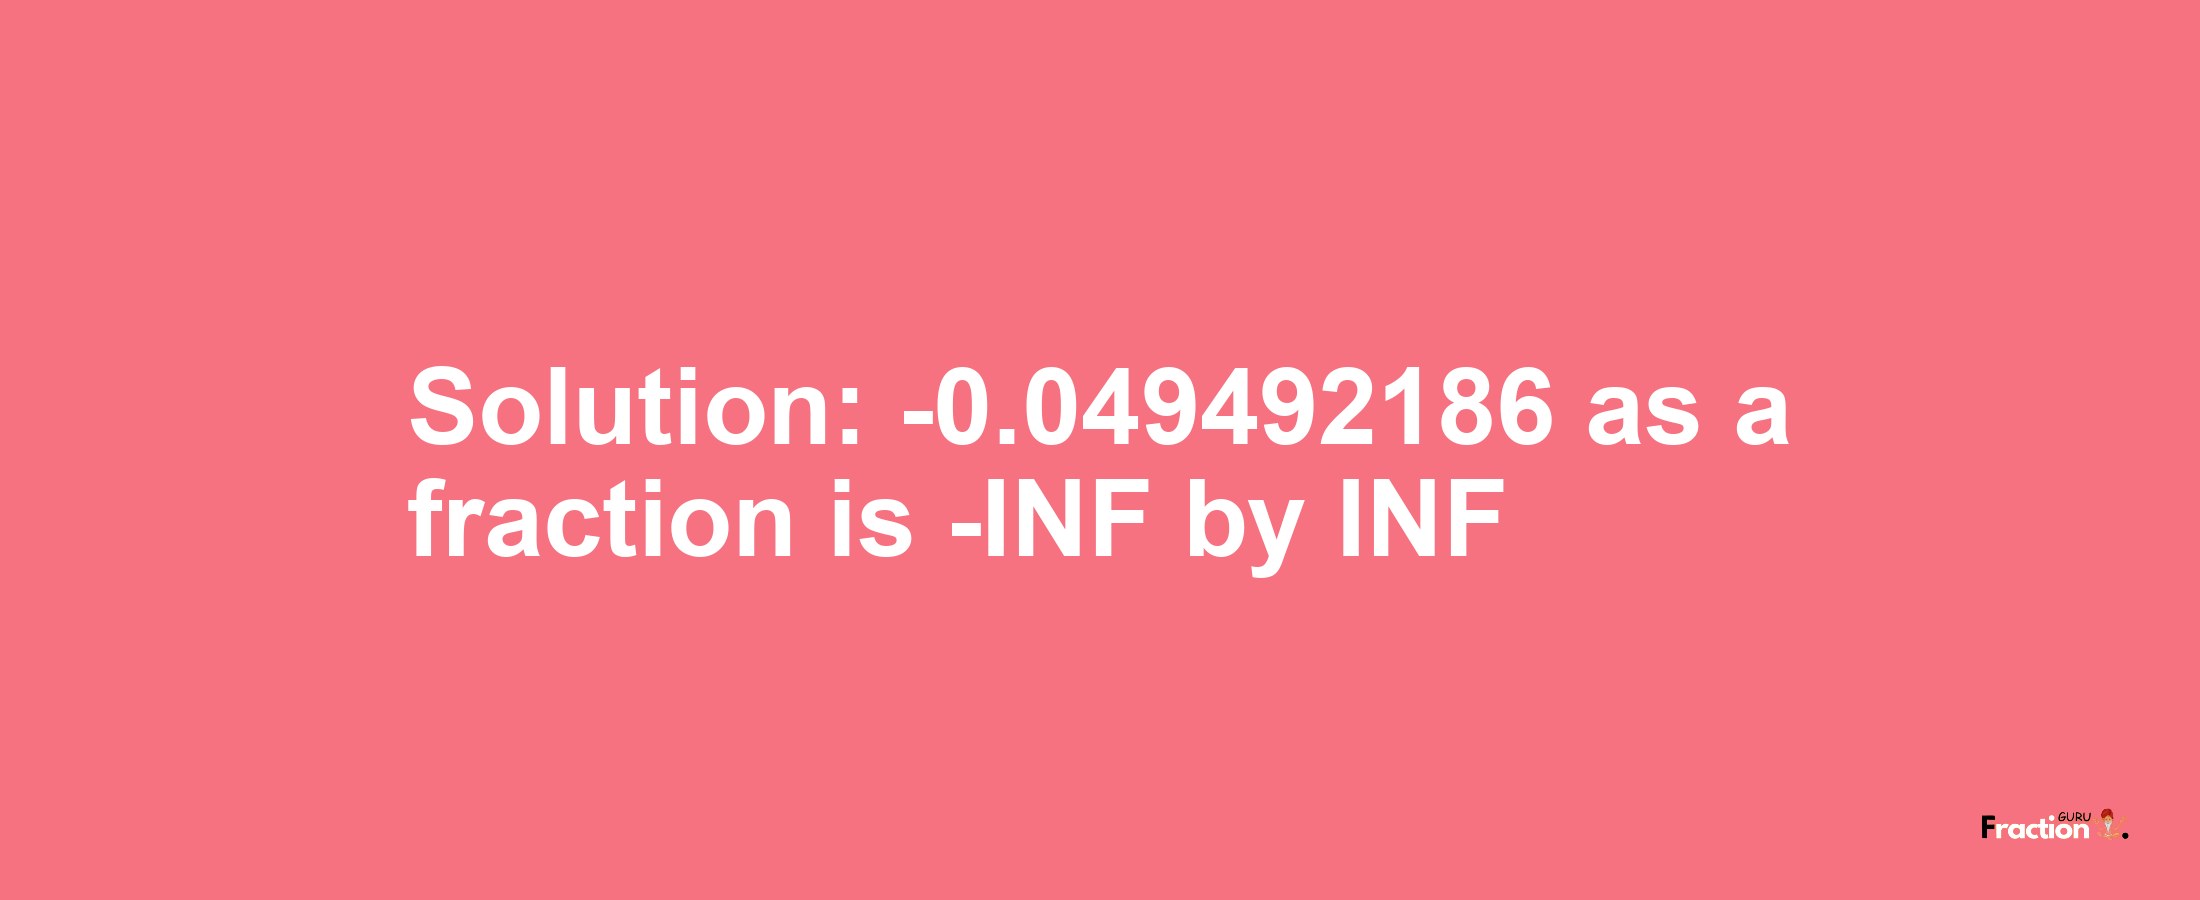 Solution:-0.049492186 as a fraction is -INF/INF